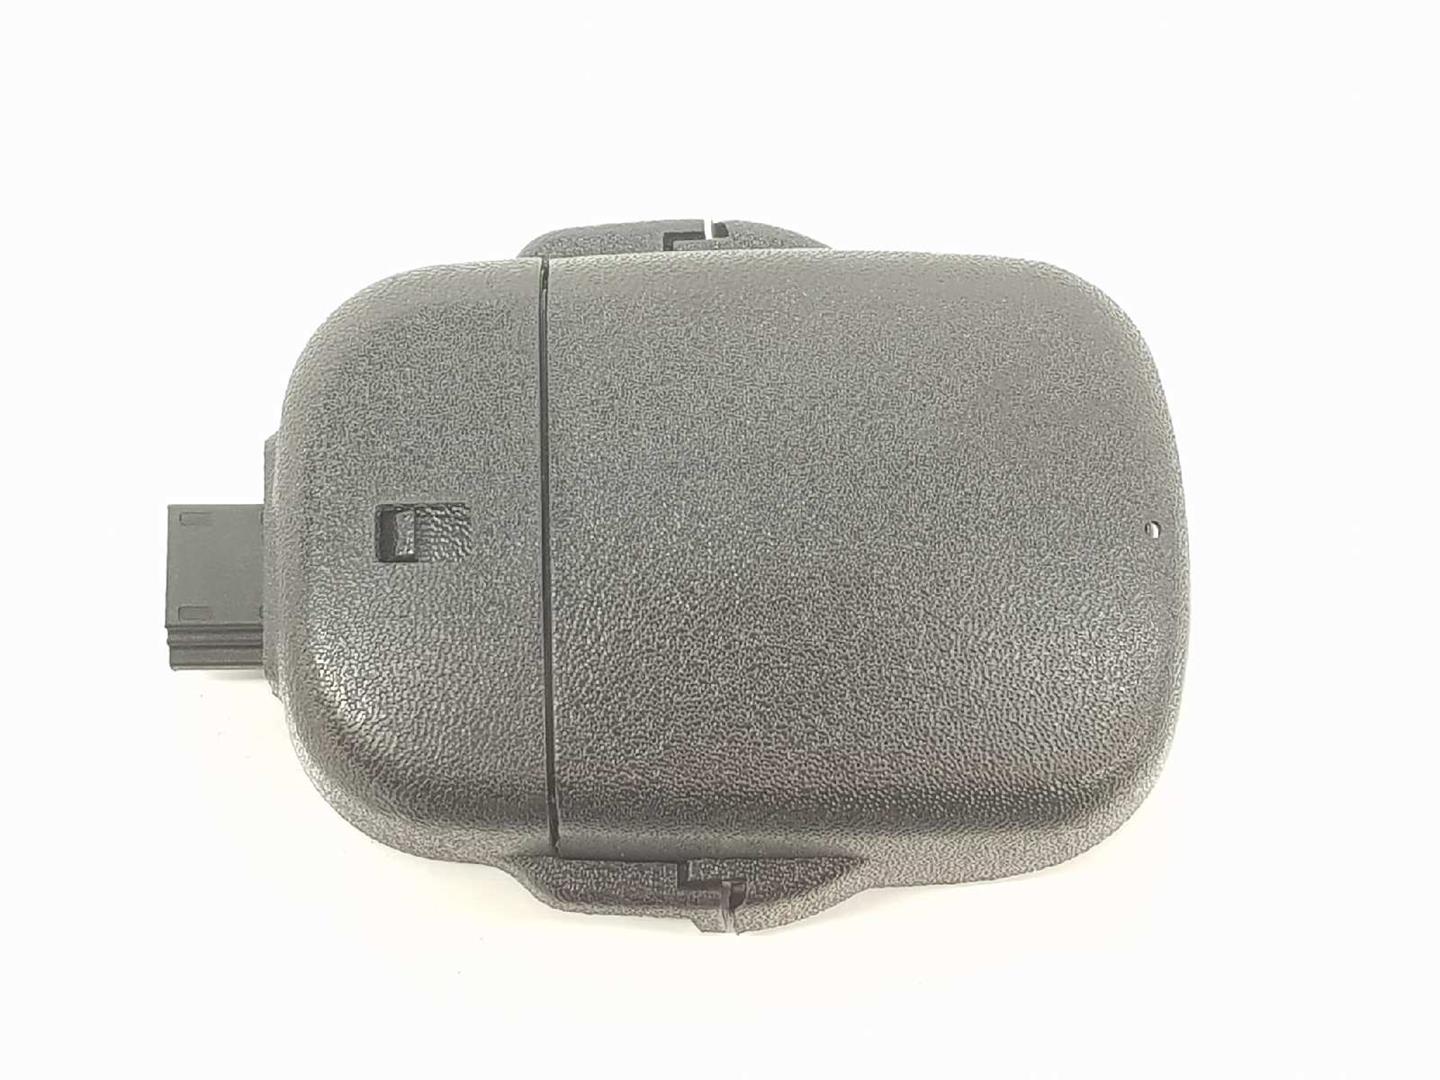 OPEL Insignia A (2008-2016) Other Control Units 13311618, 13311618 19731324